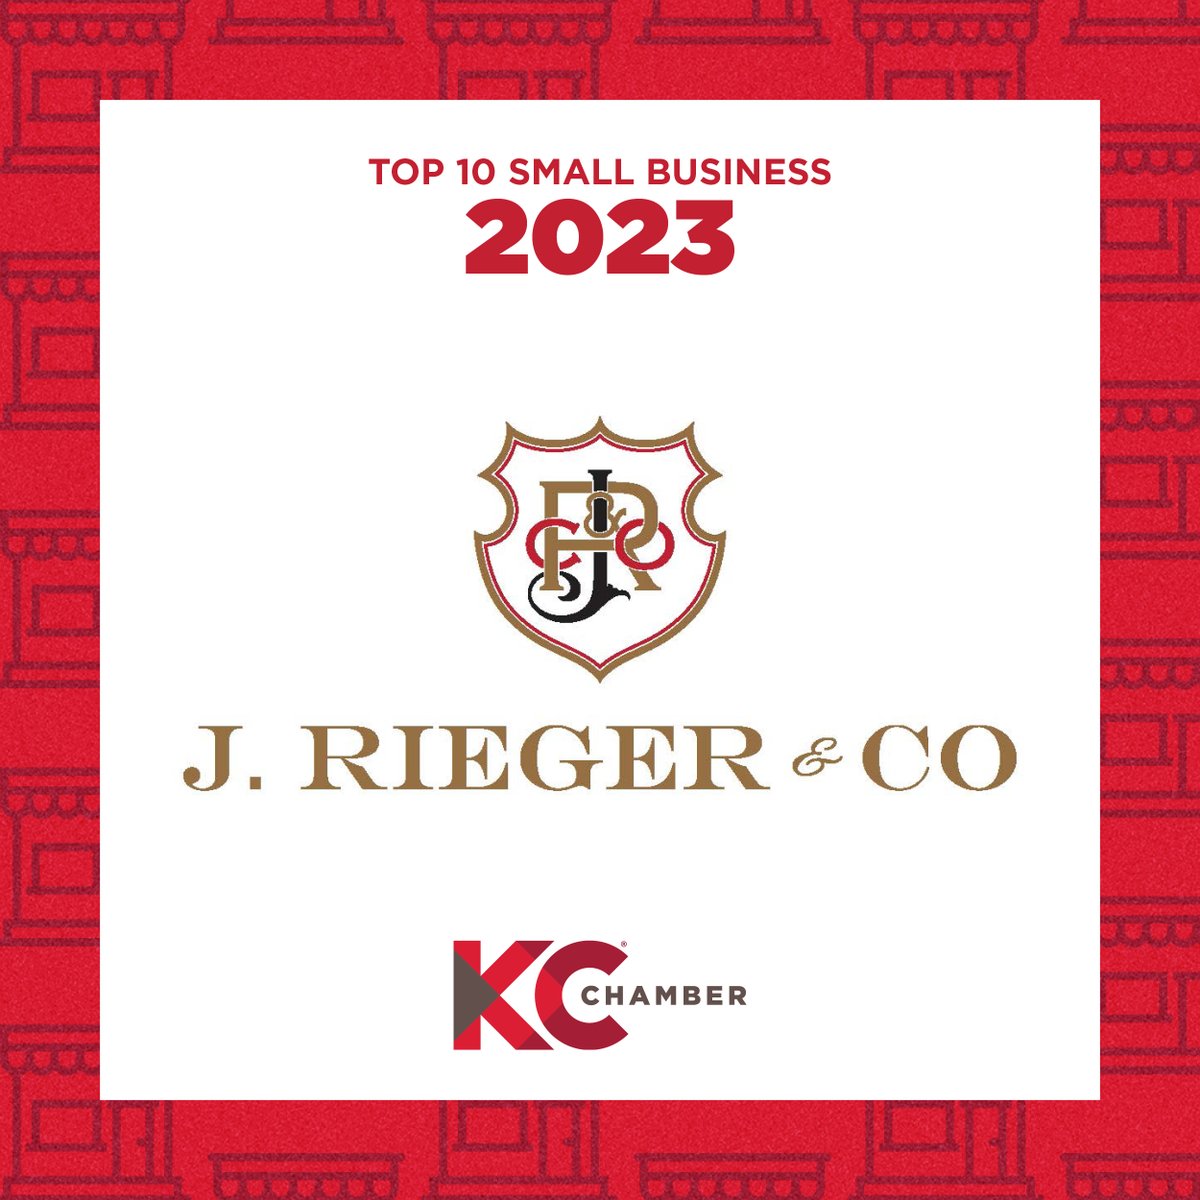 Our next Top 10 Small Business is @JRiegerCo! Congratulations!